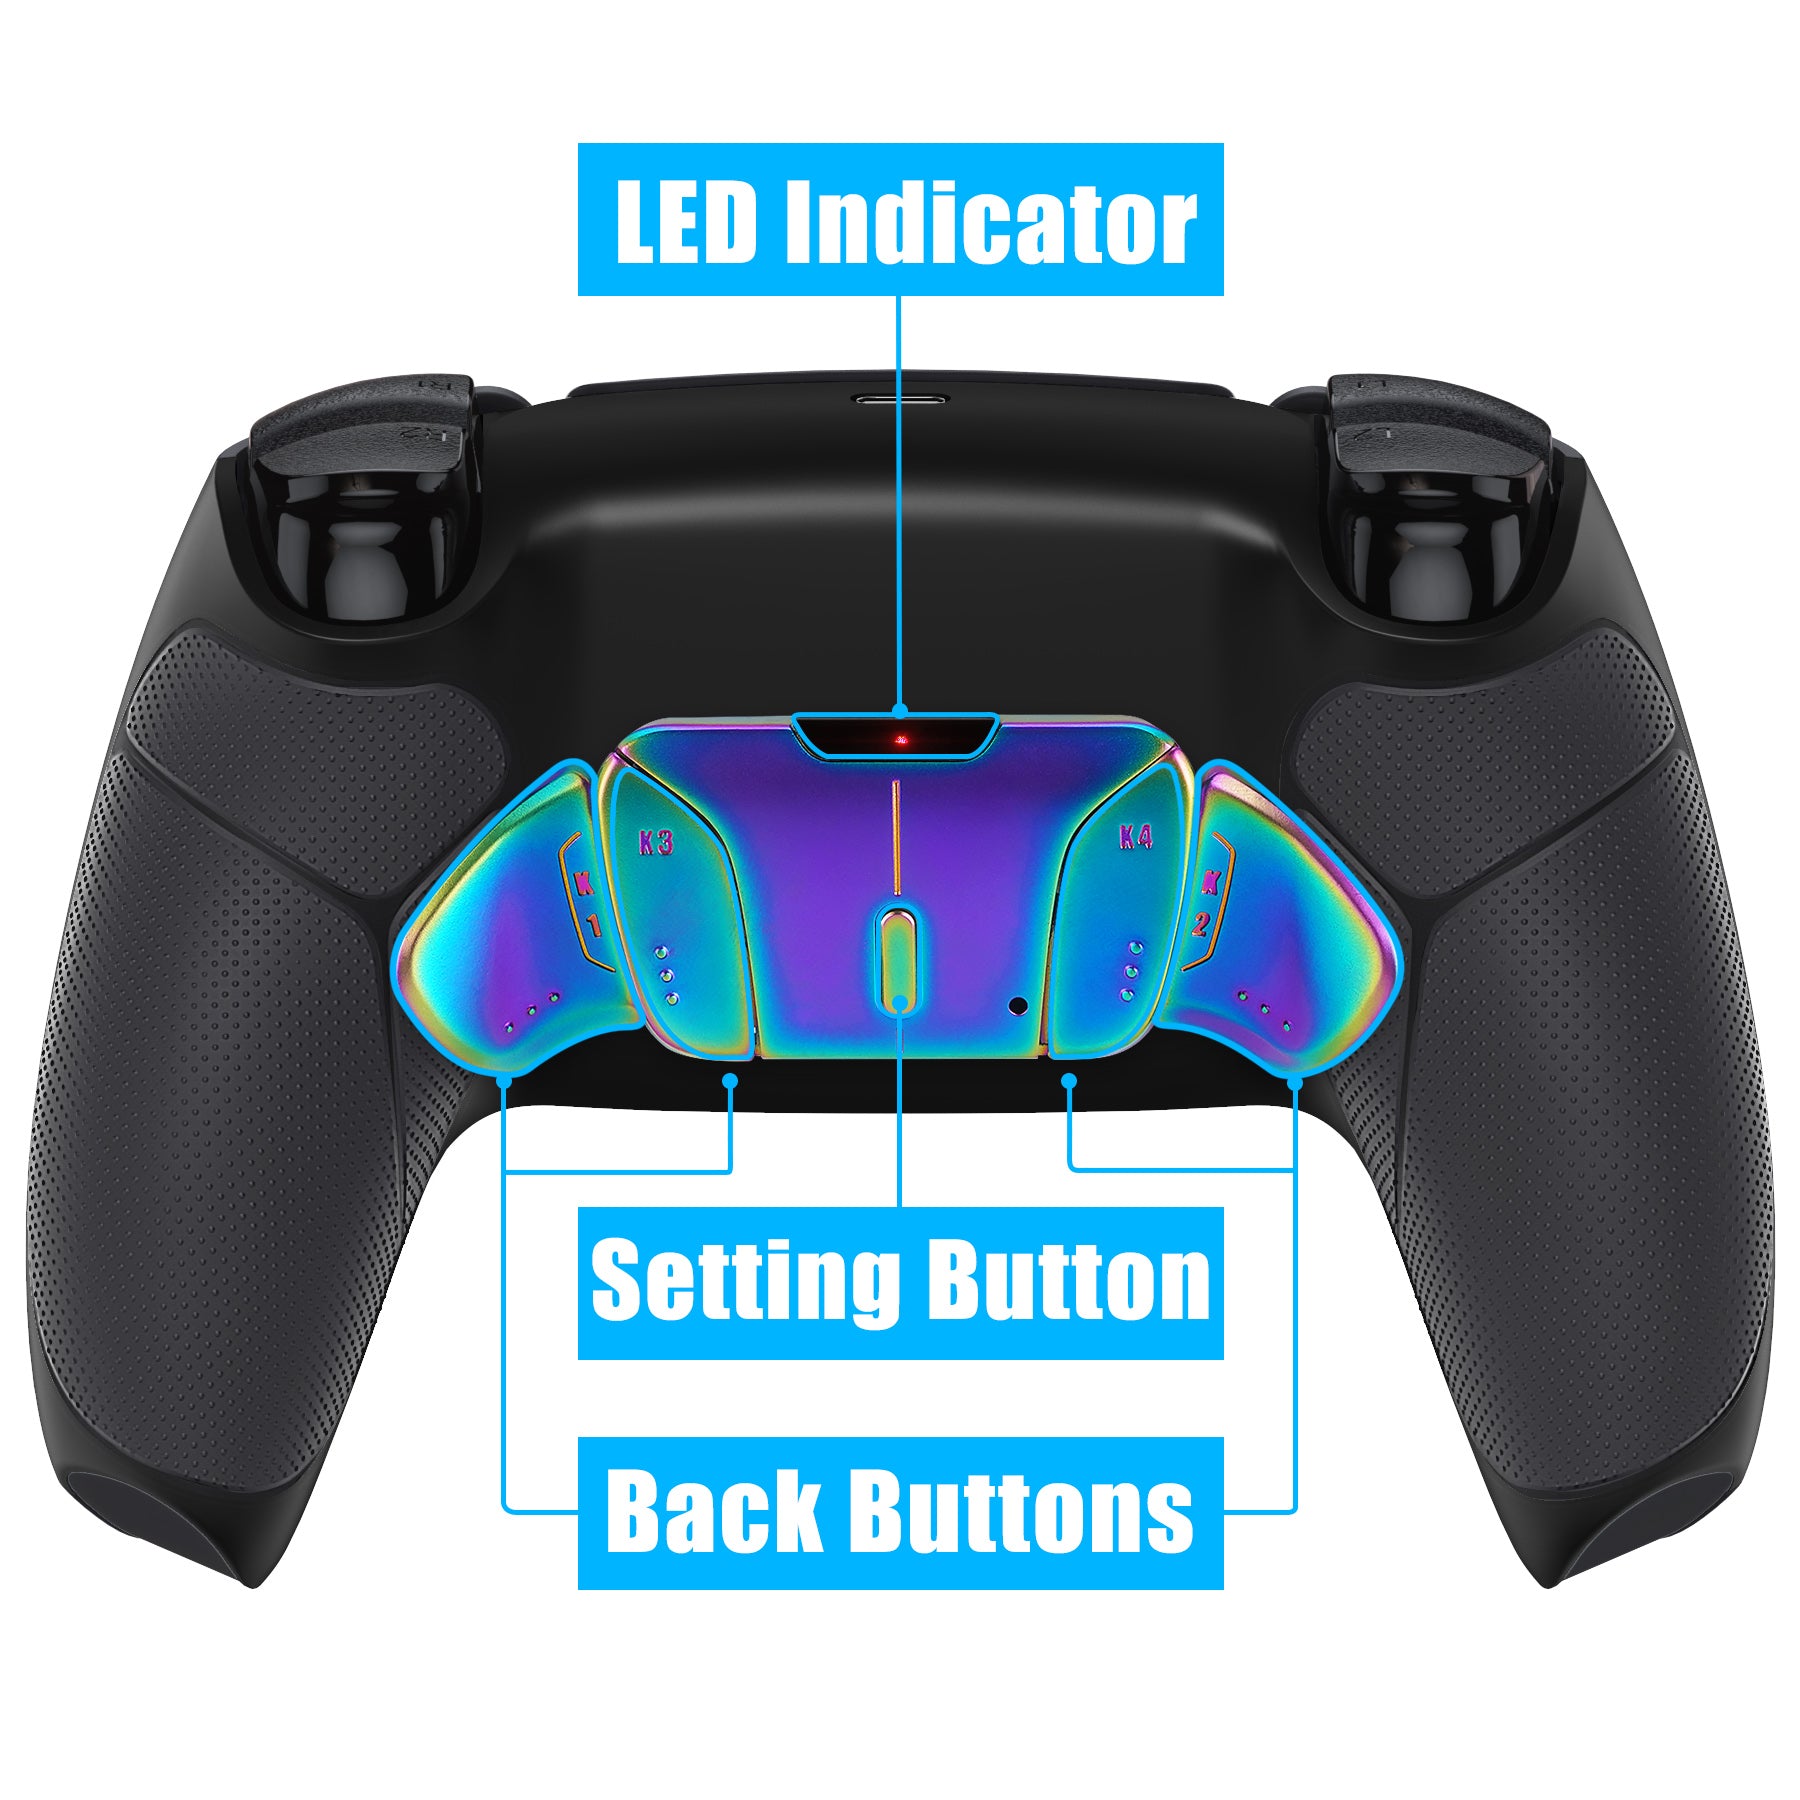 eXtremeRate Rainbow Aura Blue & Purple Real Metal Buttons (RMB) Version RISE4 Remap Kit for PS5 Controller BDM-010/020 - Rubberized Black eXtremeRate